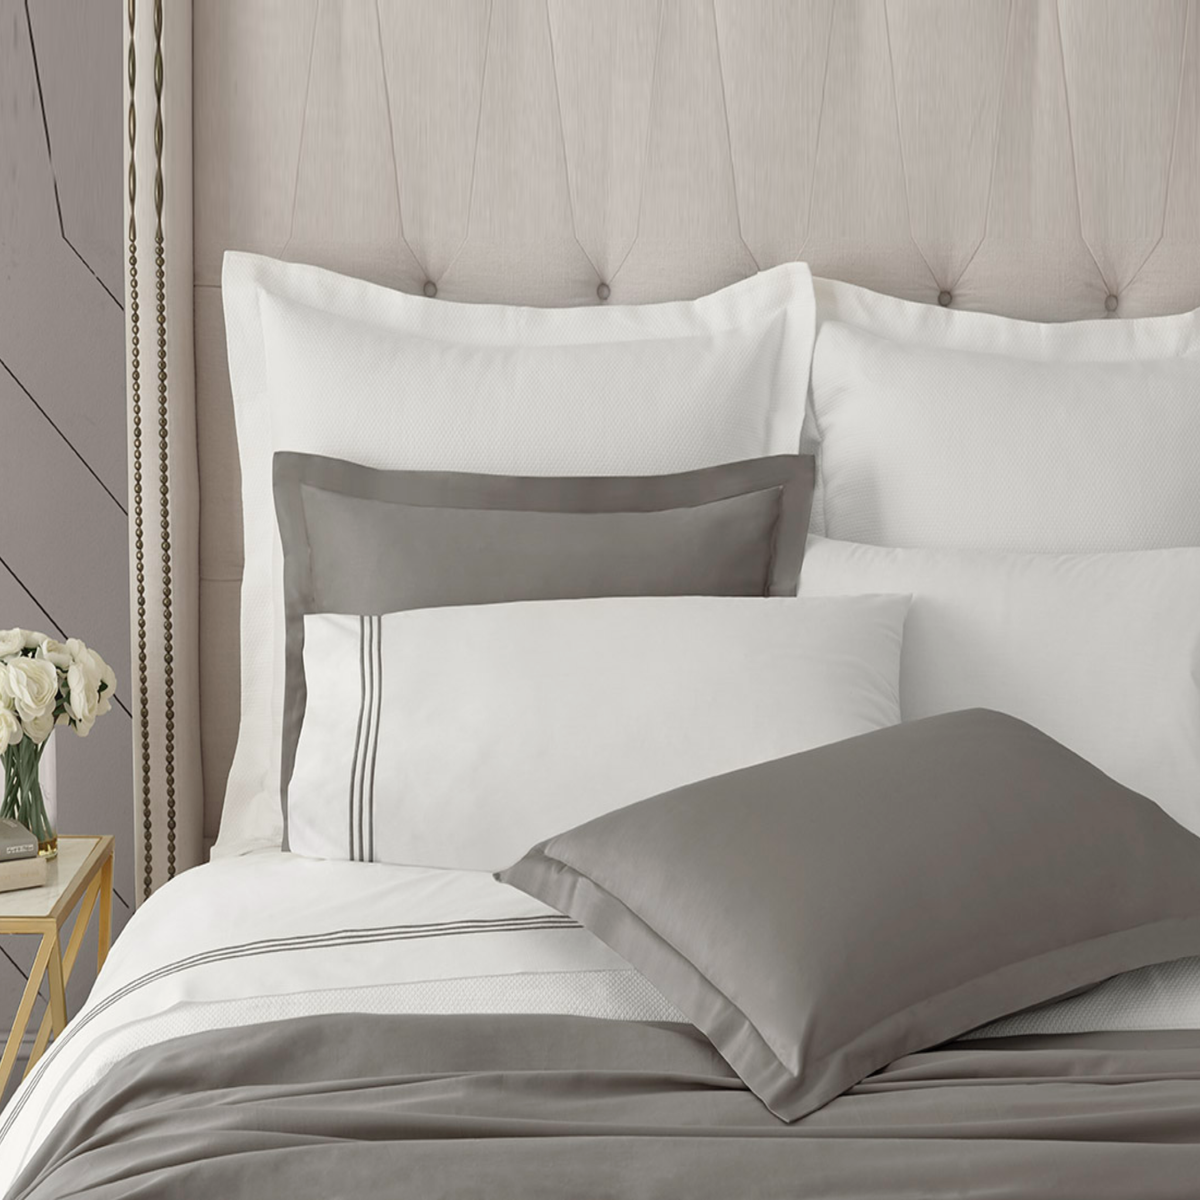 Duvet Set of Downtown Company Madison Bedding Collection in Gray Color